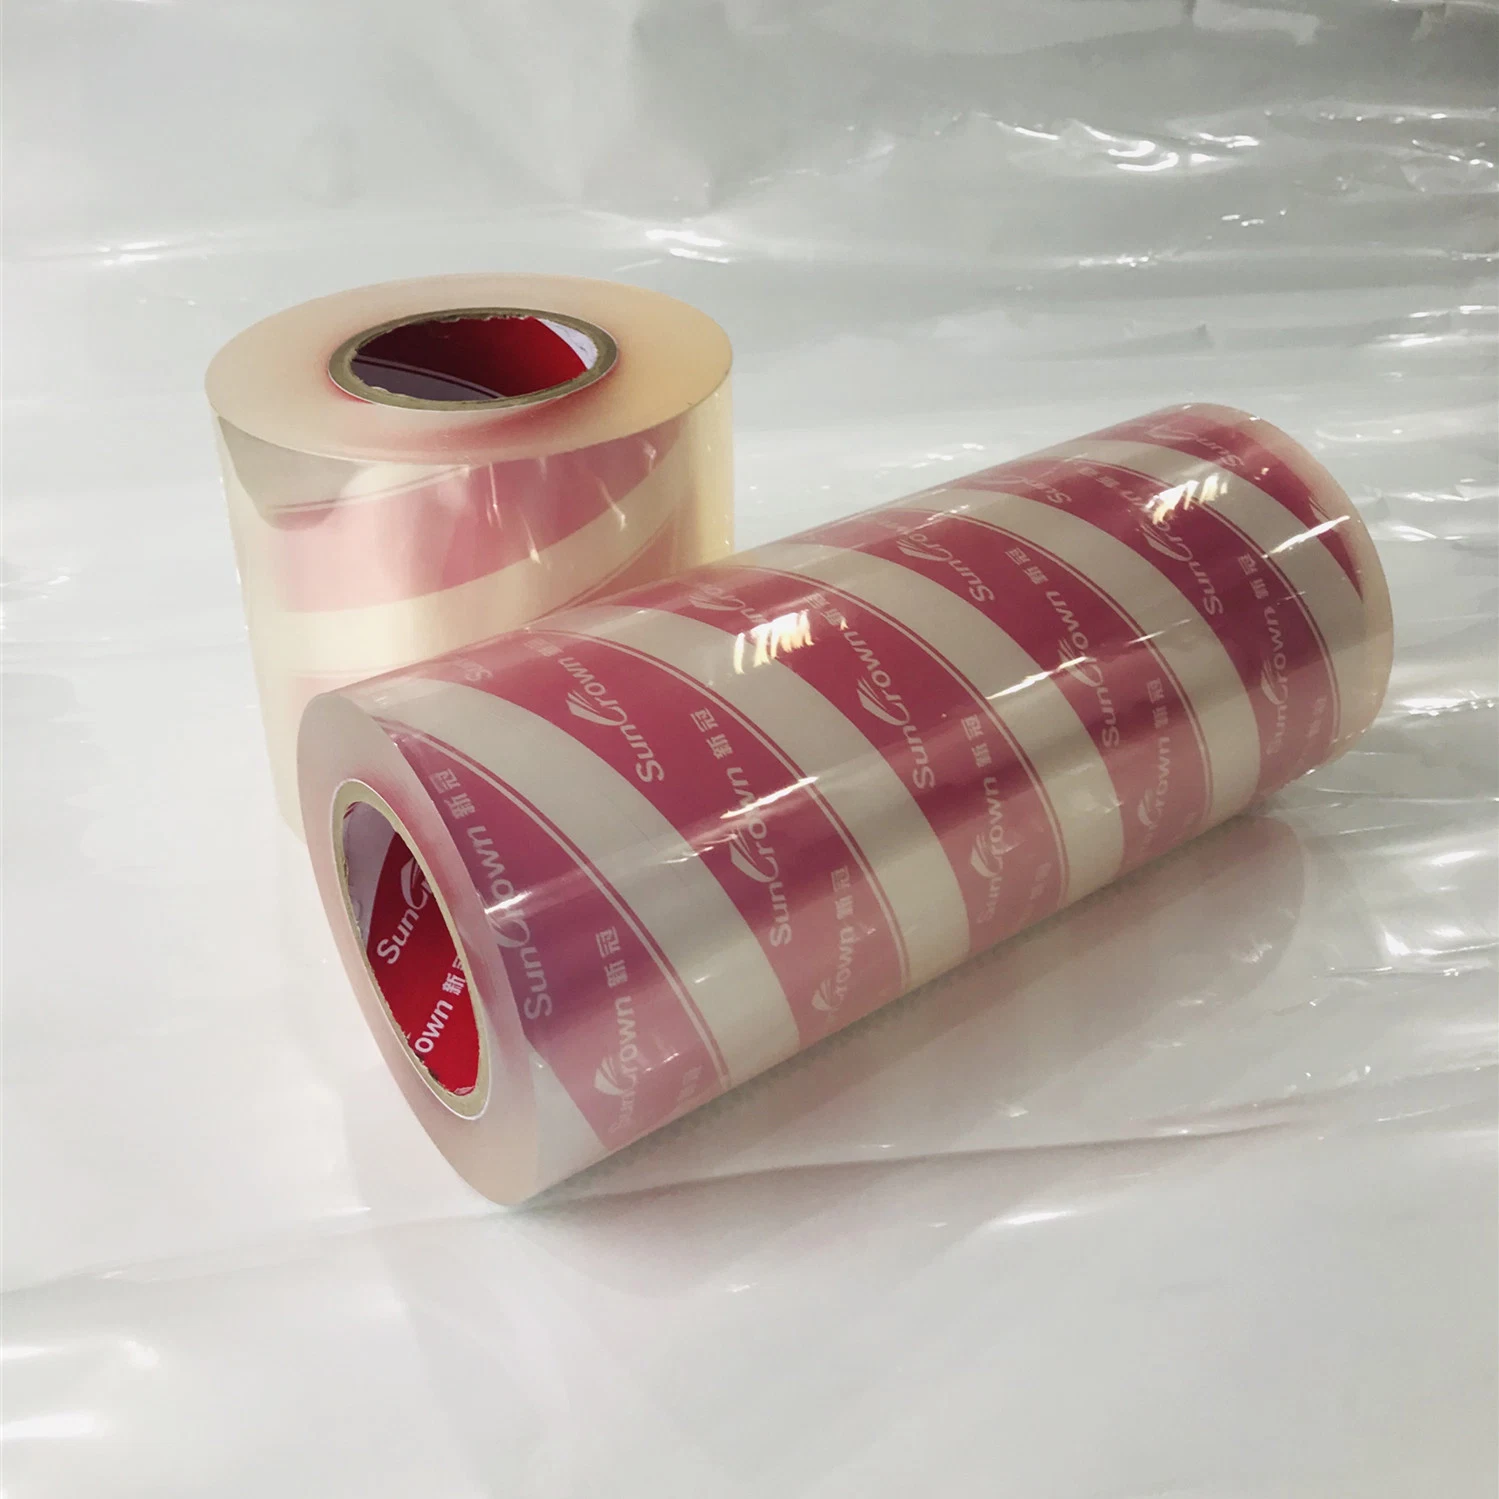 Printed Adhesive Paper or Label Material for Polishing Film Sp015 with Scaling The Oil-Solution Glue